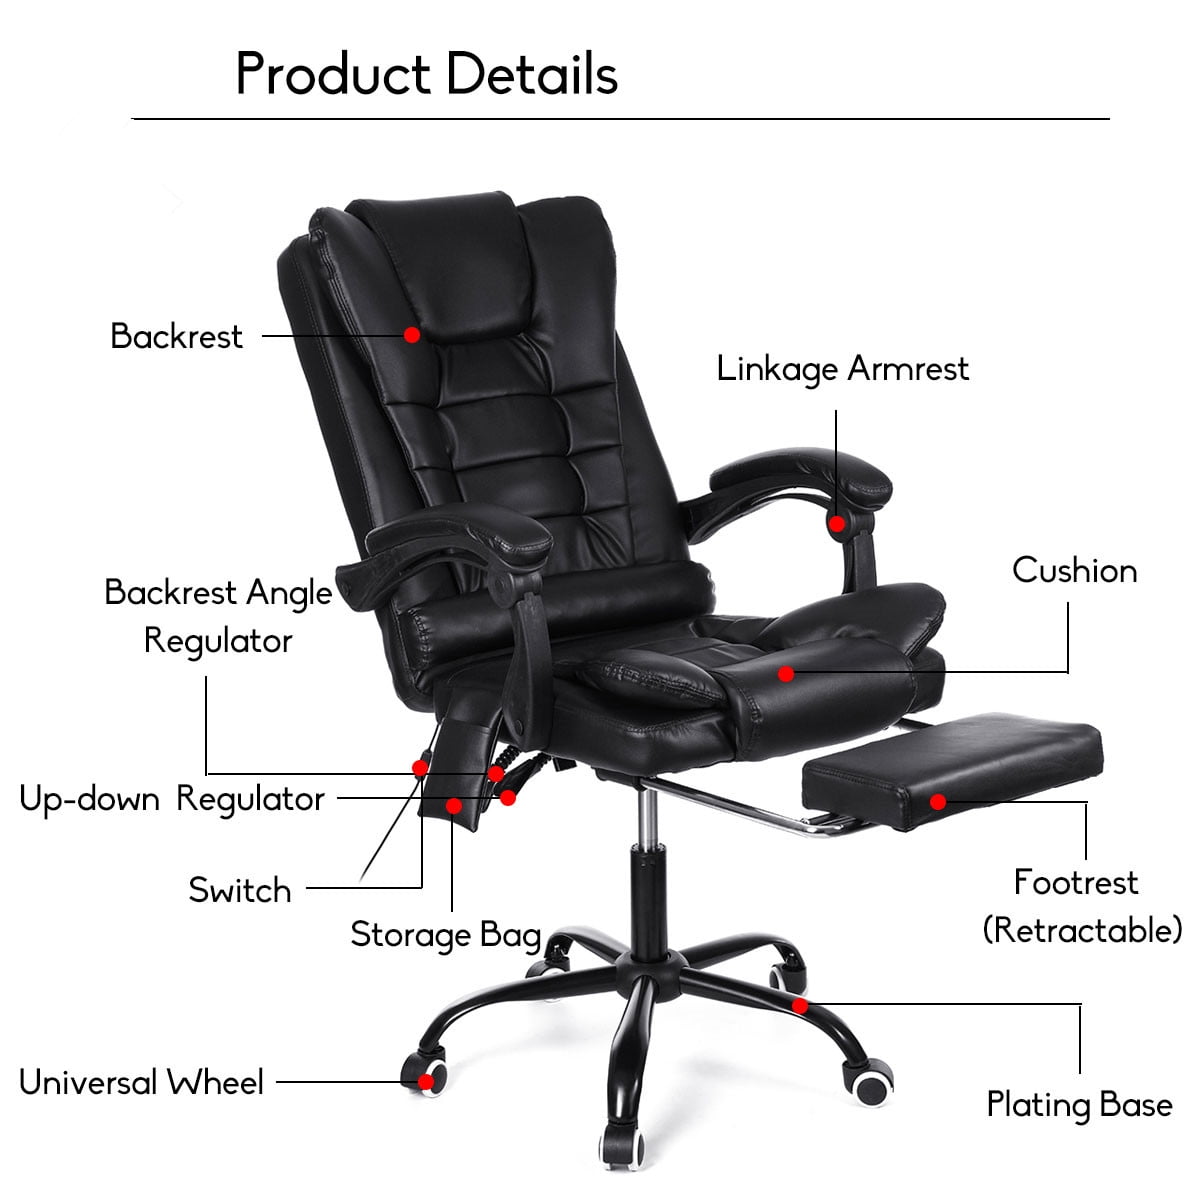 Ergonomic Massage Office Chair with 7-Point Vibration, Faux Leather High  Back Executive Office Chair with Comfort Lumbar Support Upholstered Linkage  Armrest, 135 Degree Reclining Swivel Desk Chair 